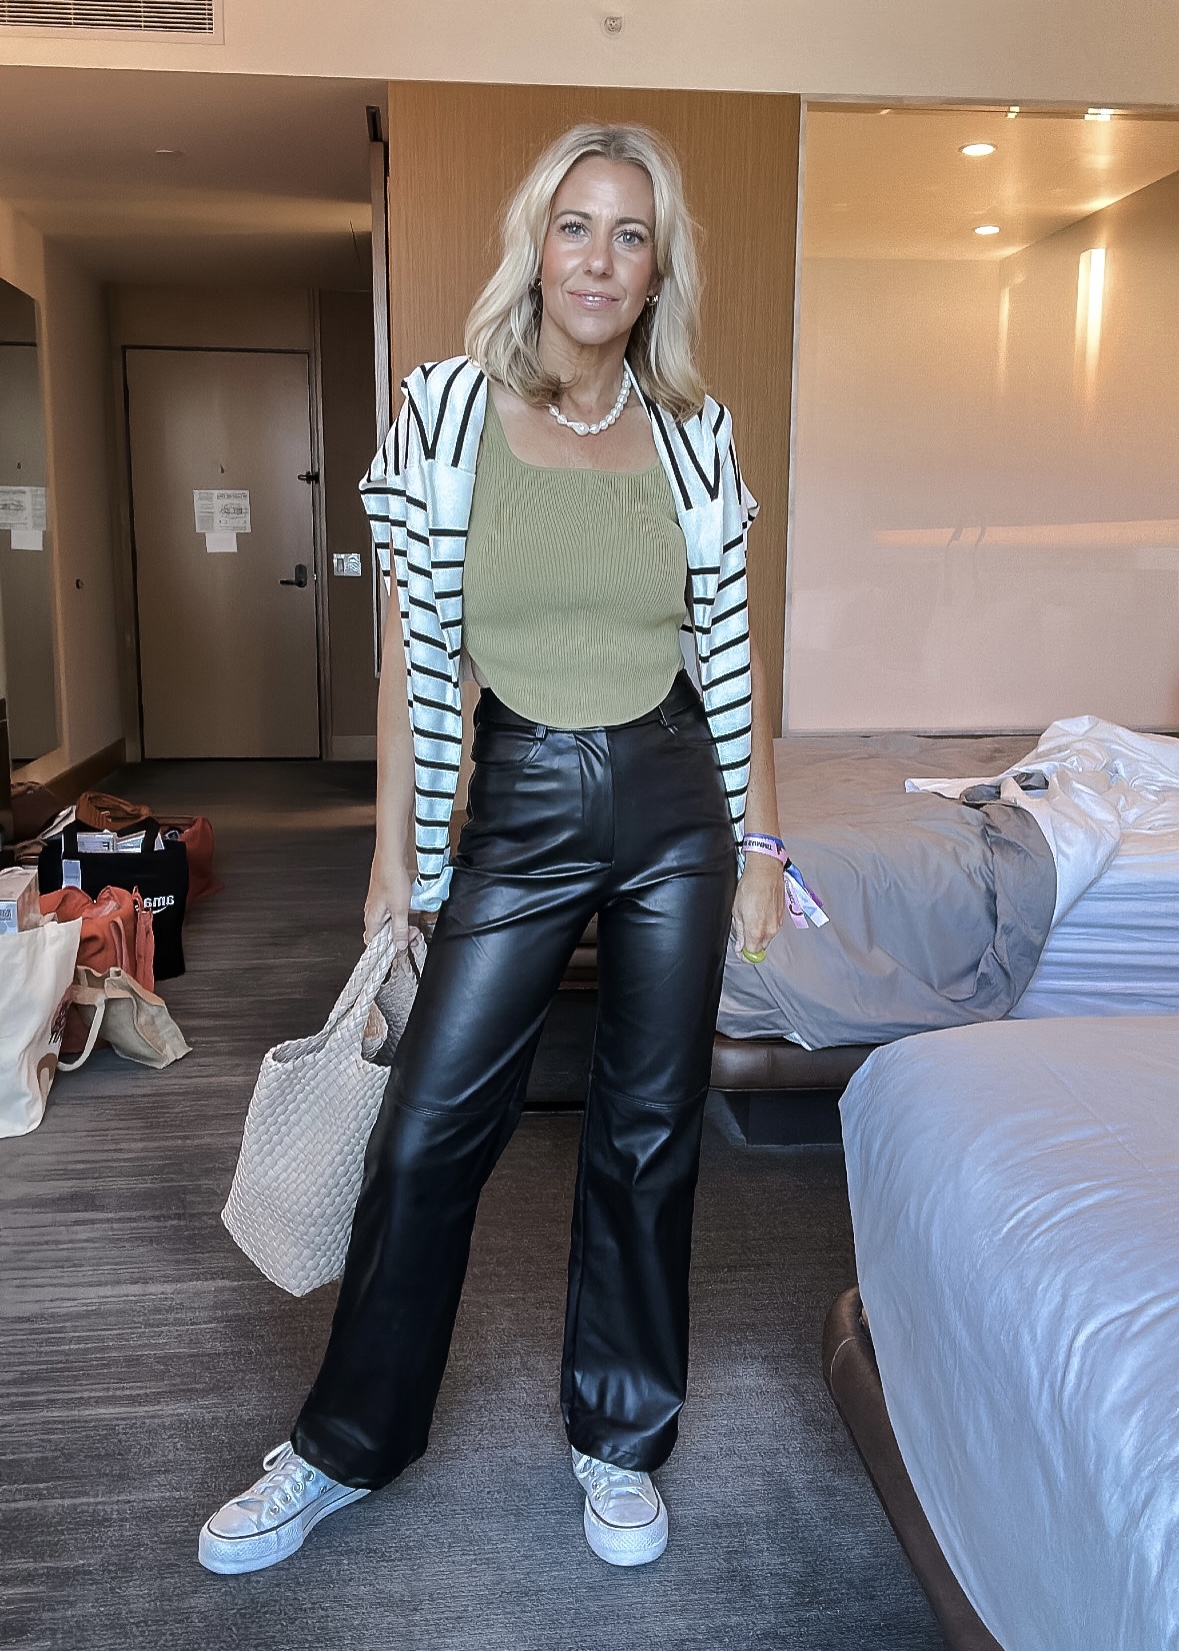 What I’ve been wearing lately from Amazon-Jaclyn De Leon Style. Sharing casual chic Amazon outfits that I'm loving. Amazon favorites include a wide leg trouser, faux leather pants, a loungewear set, and my favorite stripe sweater.